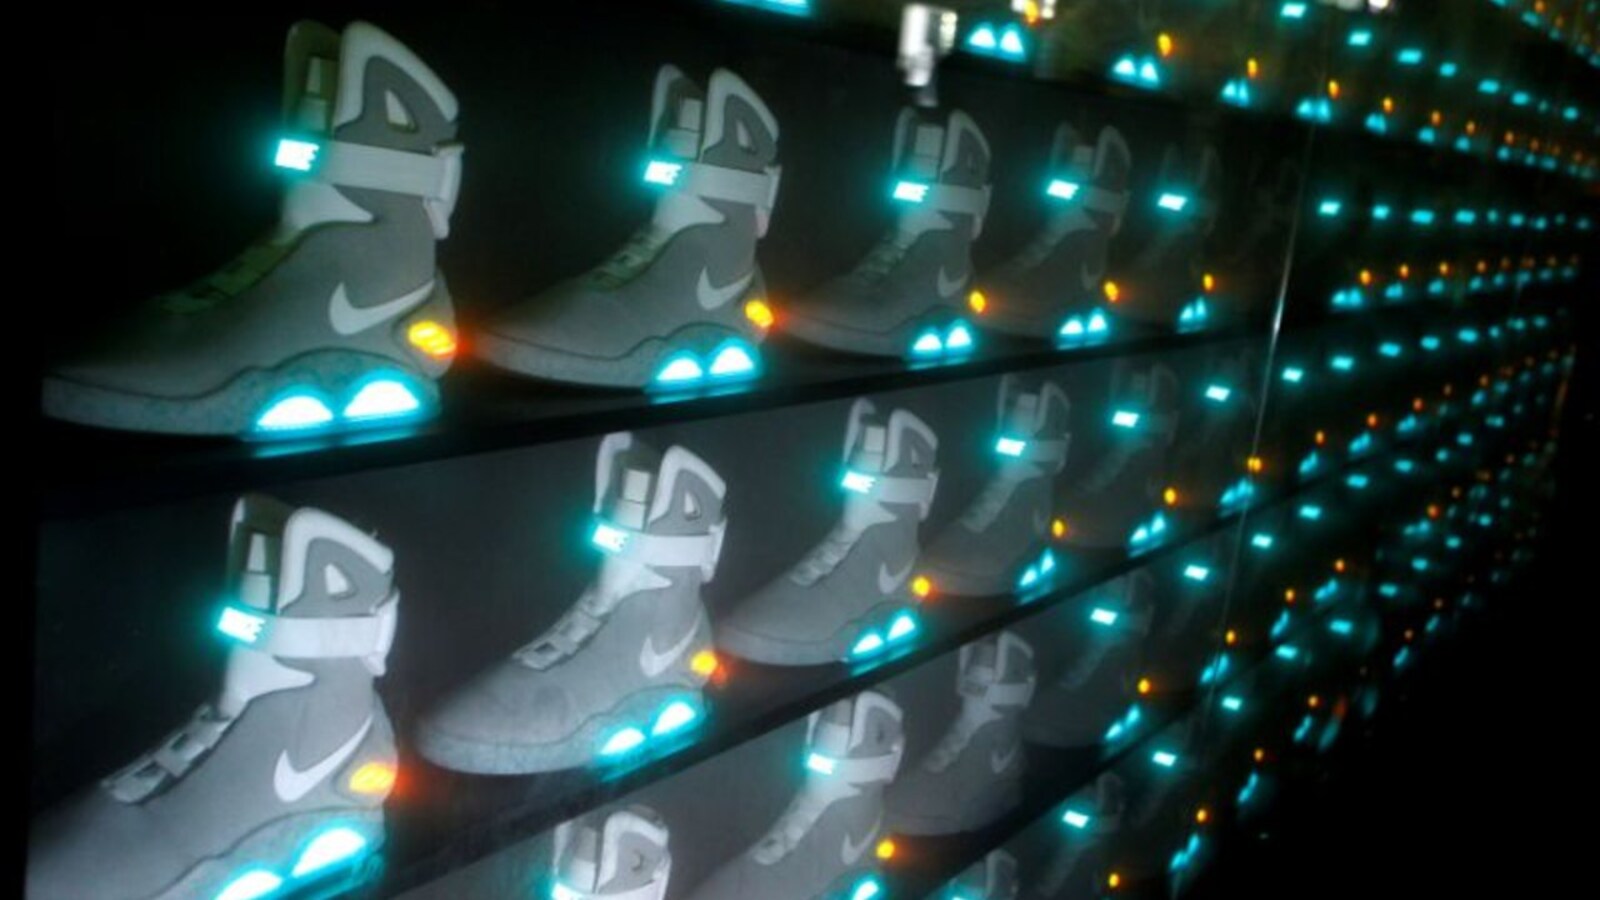 Nike's Back to the Future sneakers expected to fetch Rs 48 lakh bid at